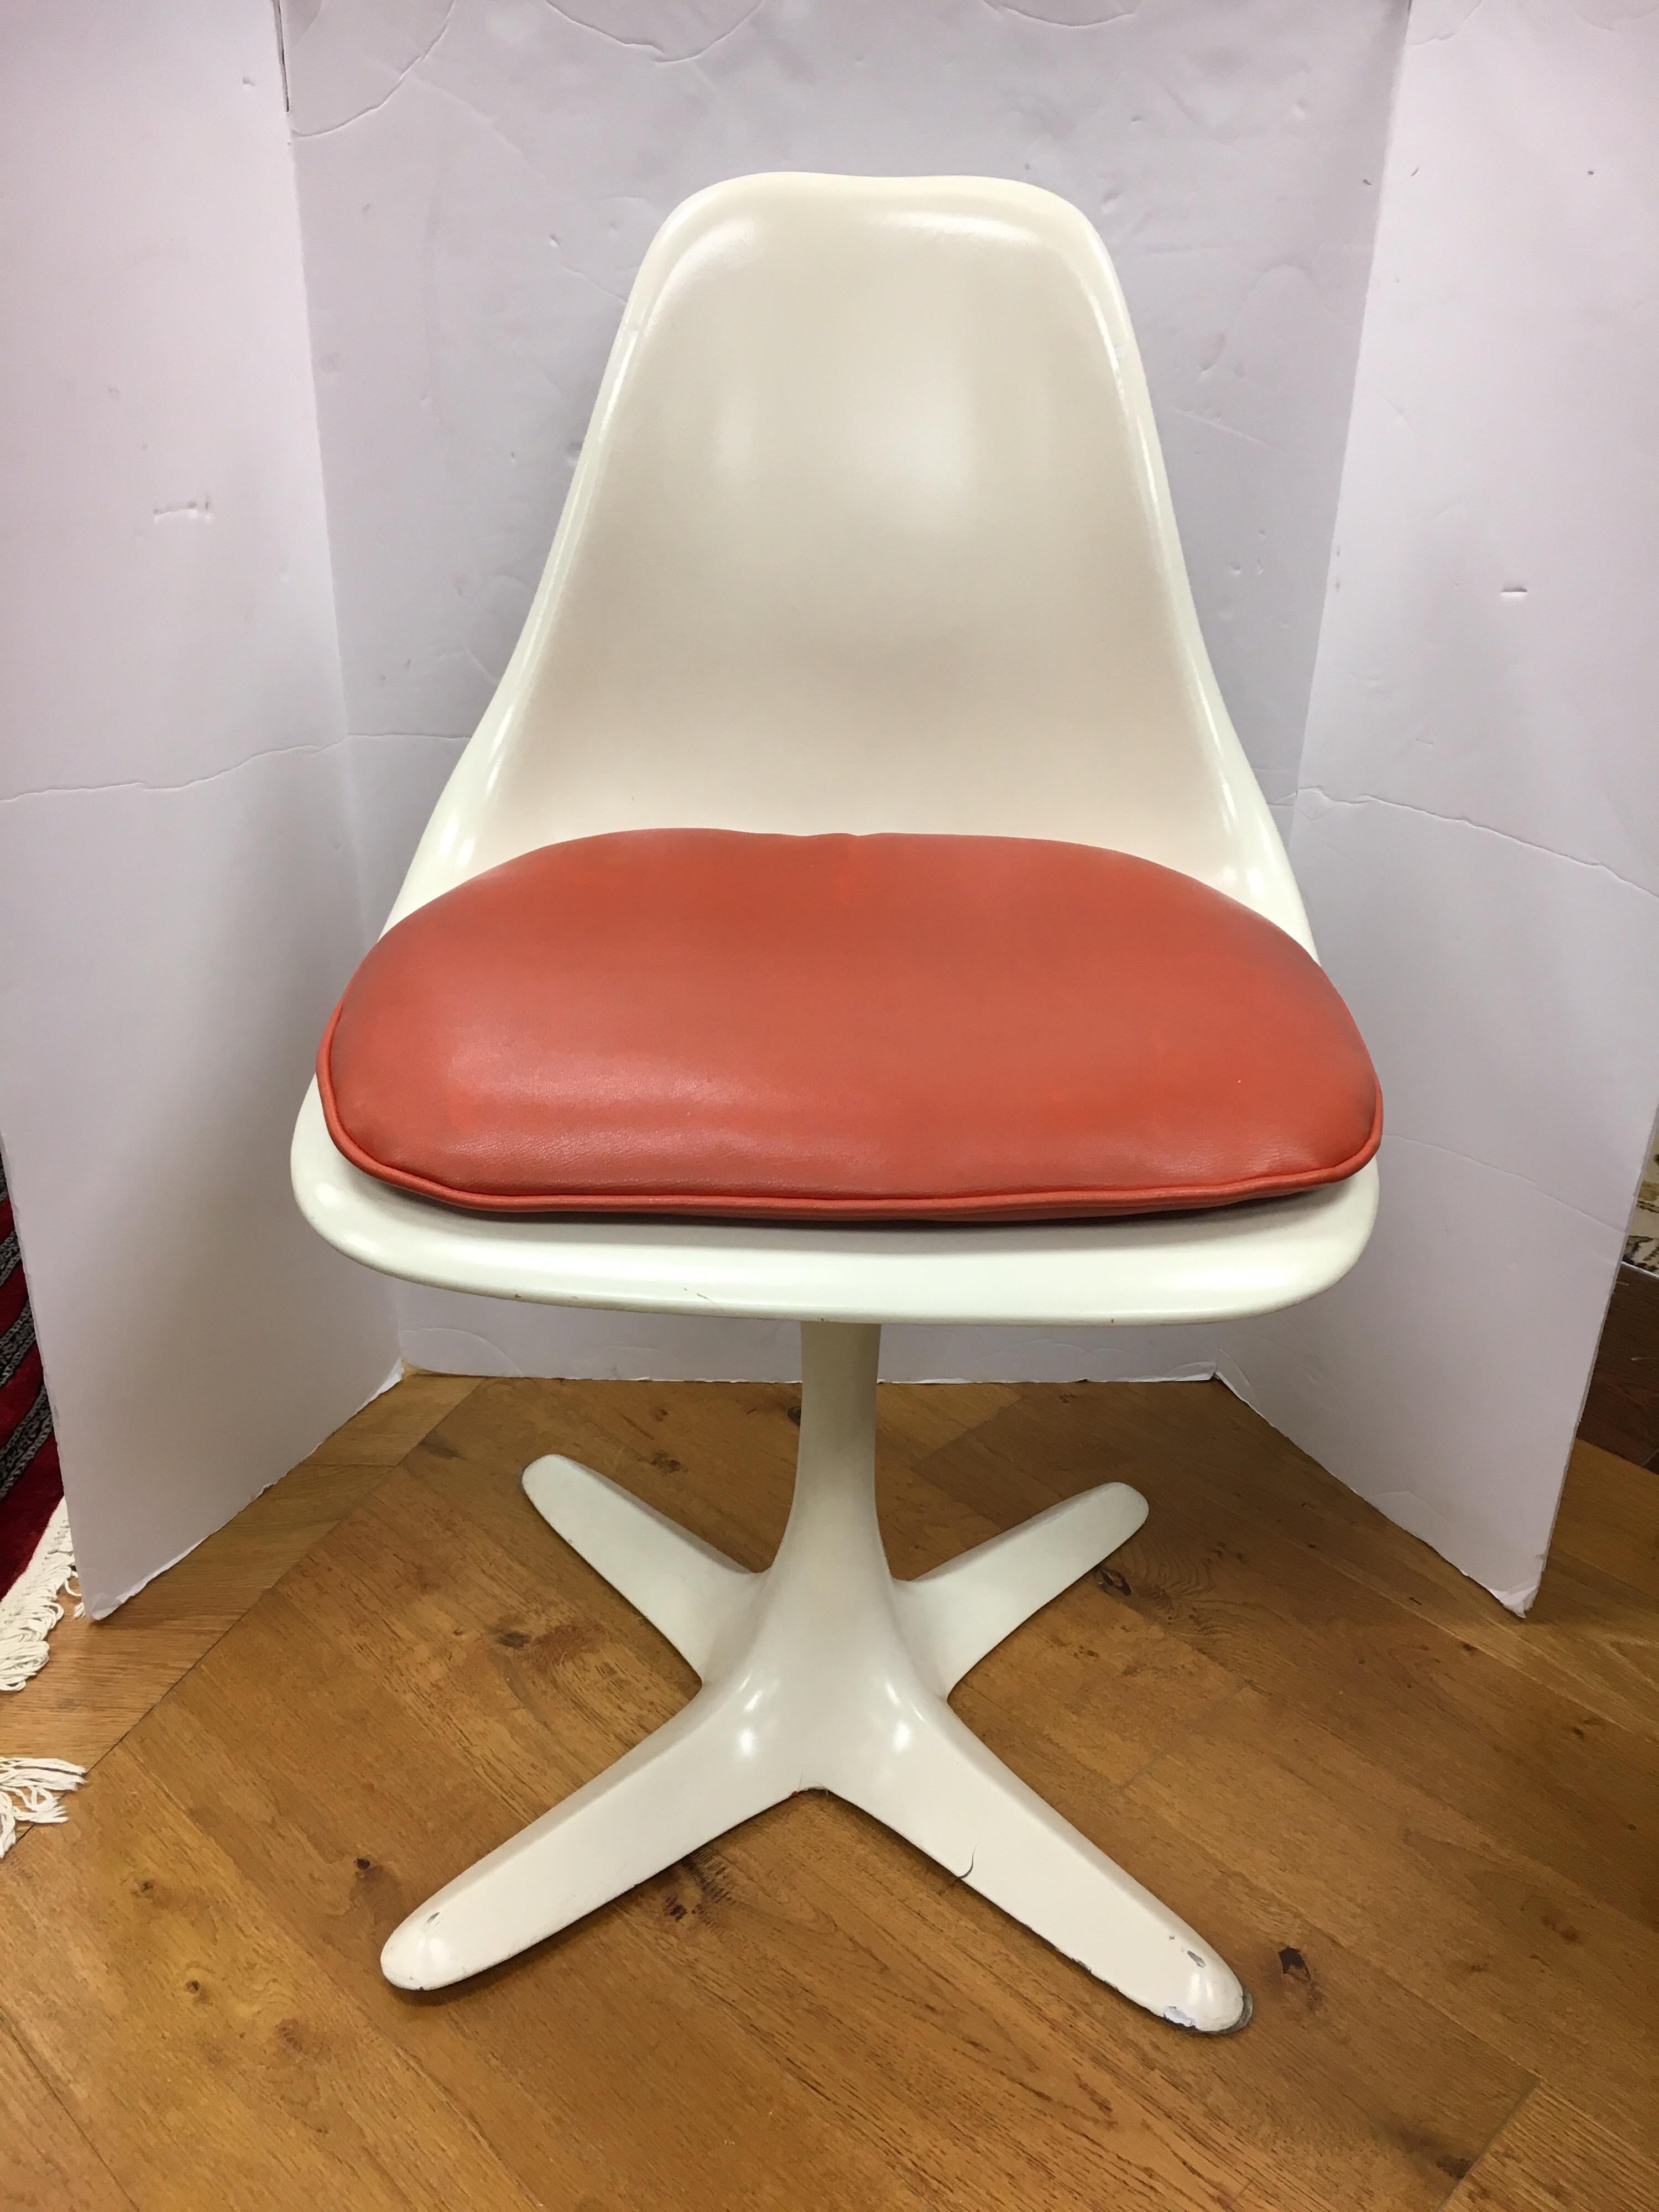 True period Saarinen style pair of white tulip chairs with orange/red removable cushion. Manufactured by
Burke, USA in the 1970s. Made of resin, metal and seat fabric which is vinyl.